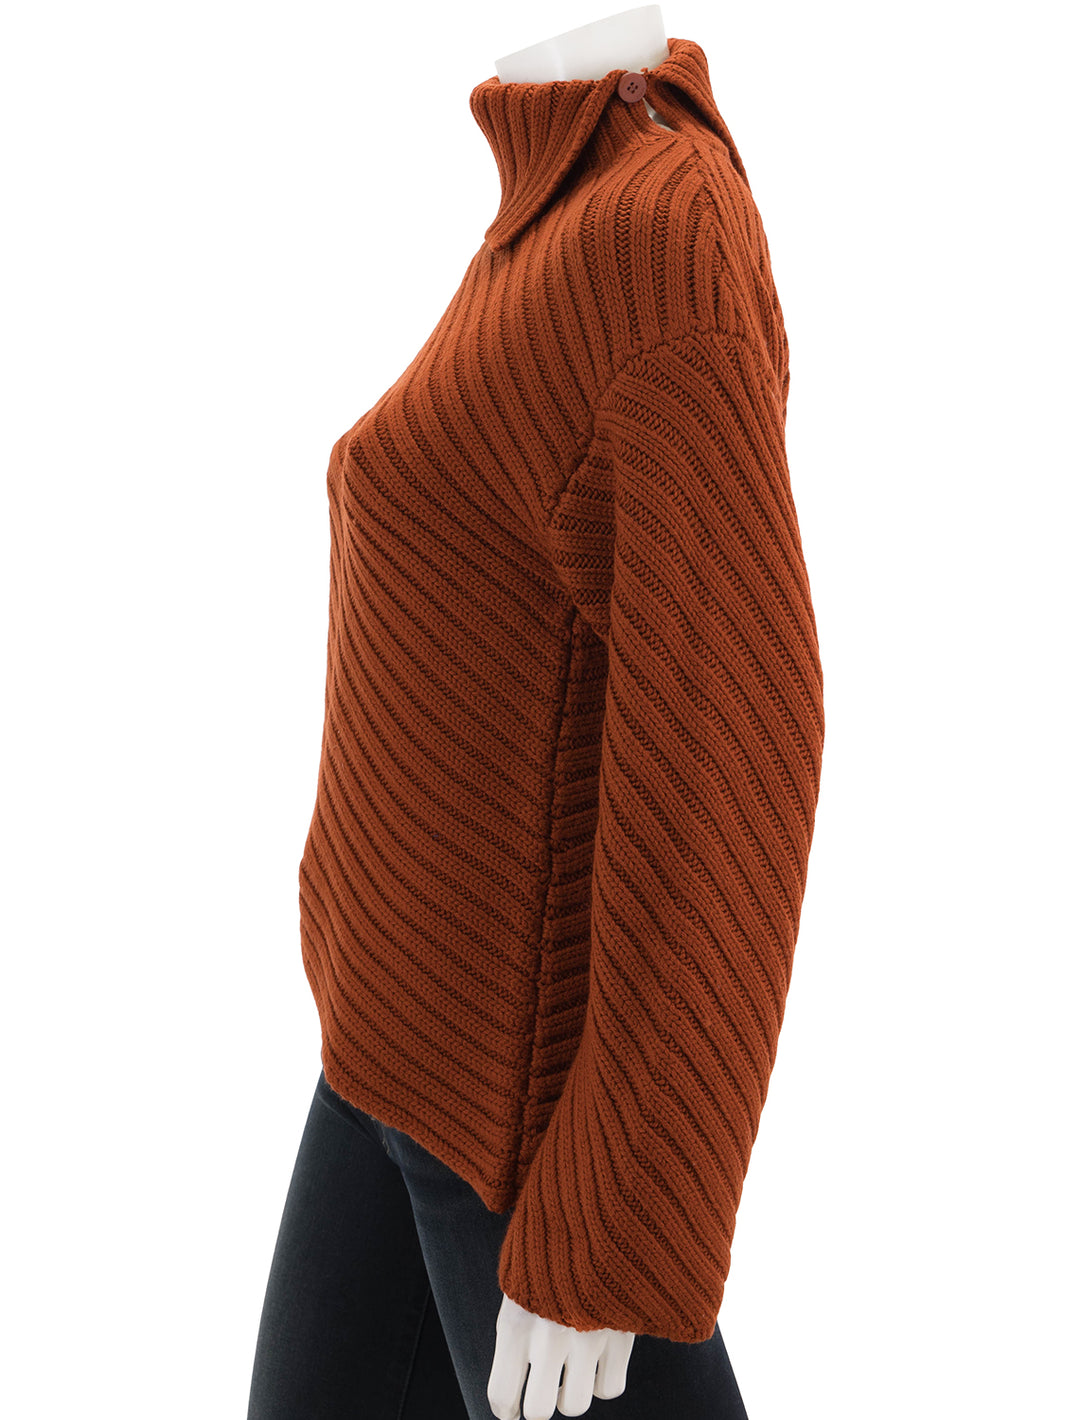 Side view of STAUD's engrave sweater in cinnamon.